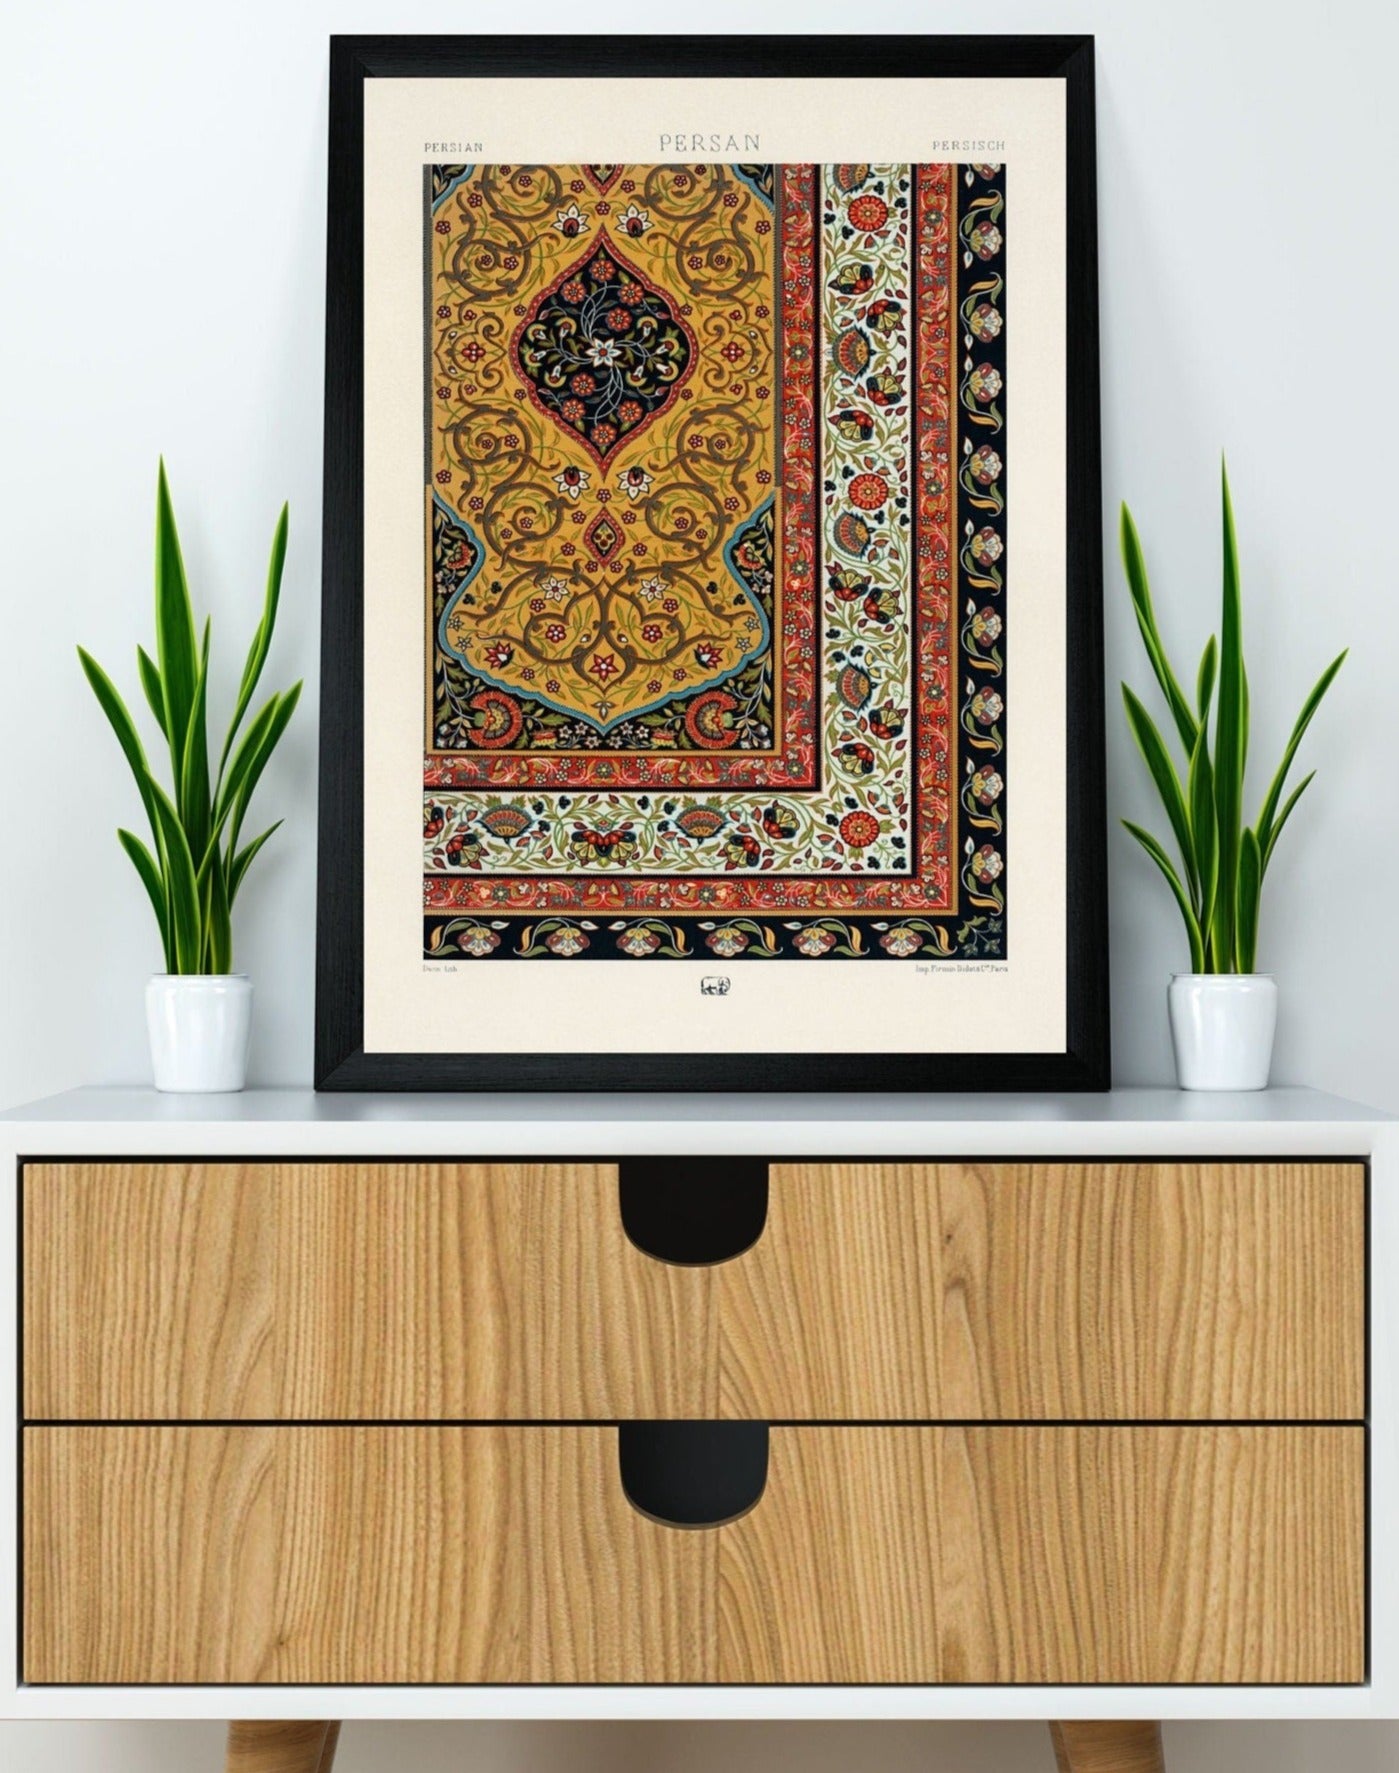 Persian pattern from L'ornement Polychrome by Albert Racinet Illustration Poster Print Wall Hanging Decor A4 A3 A2